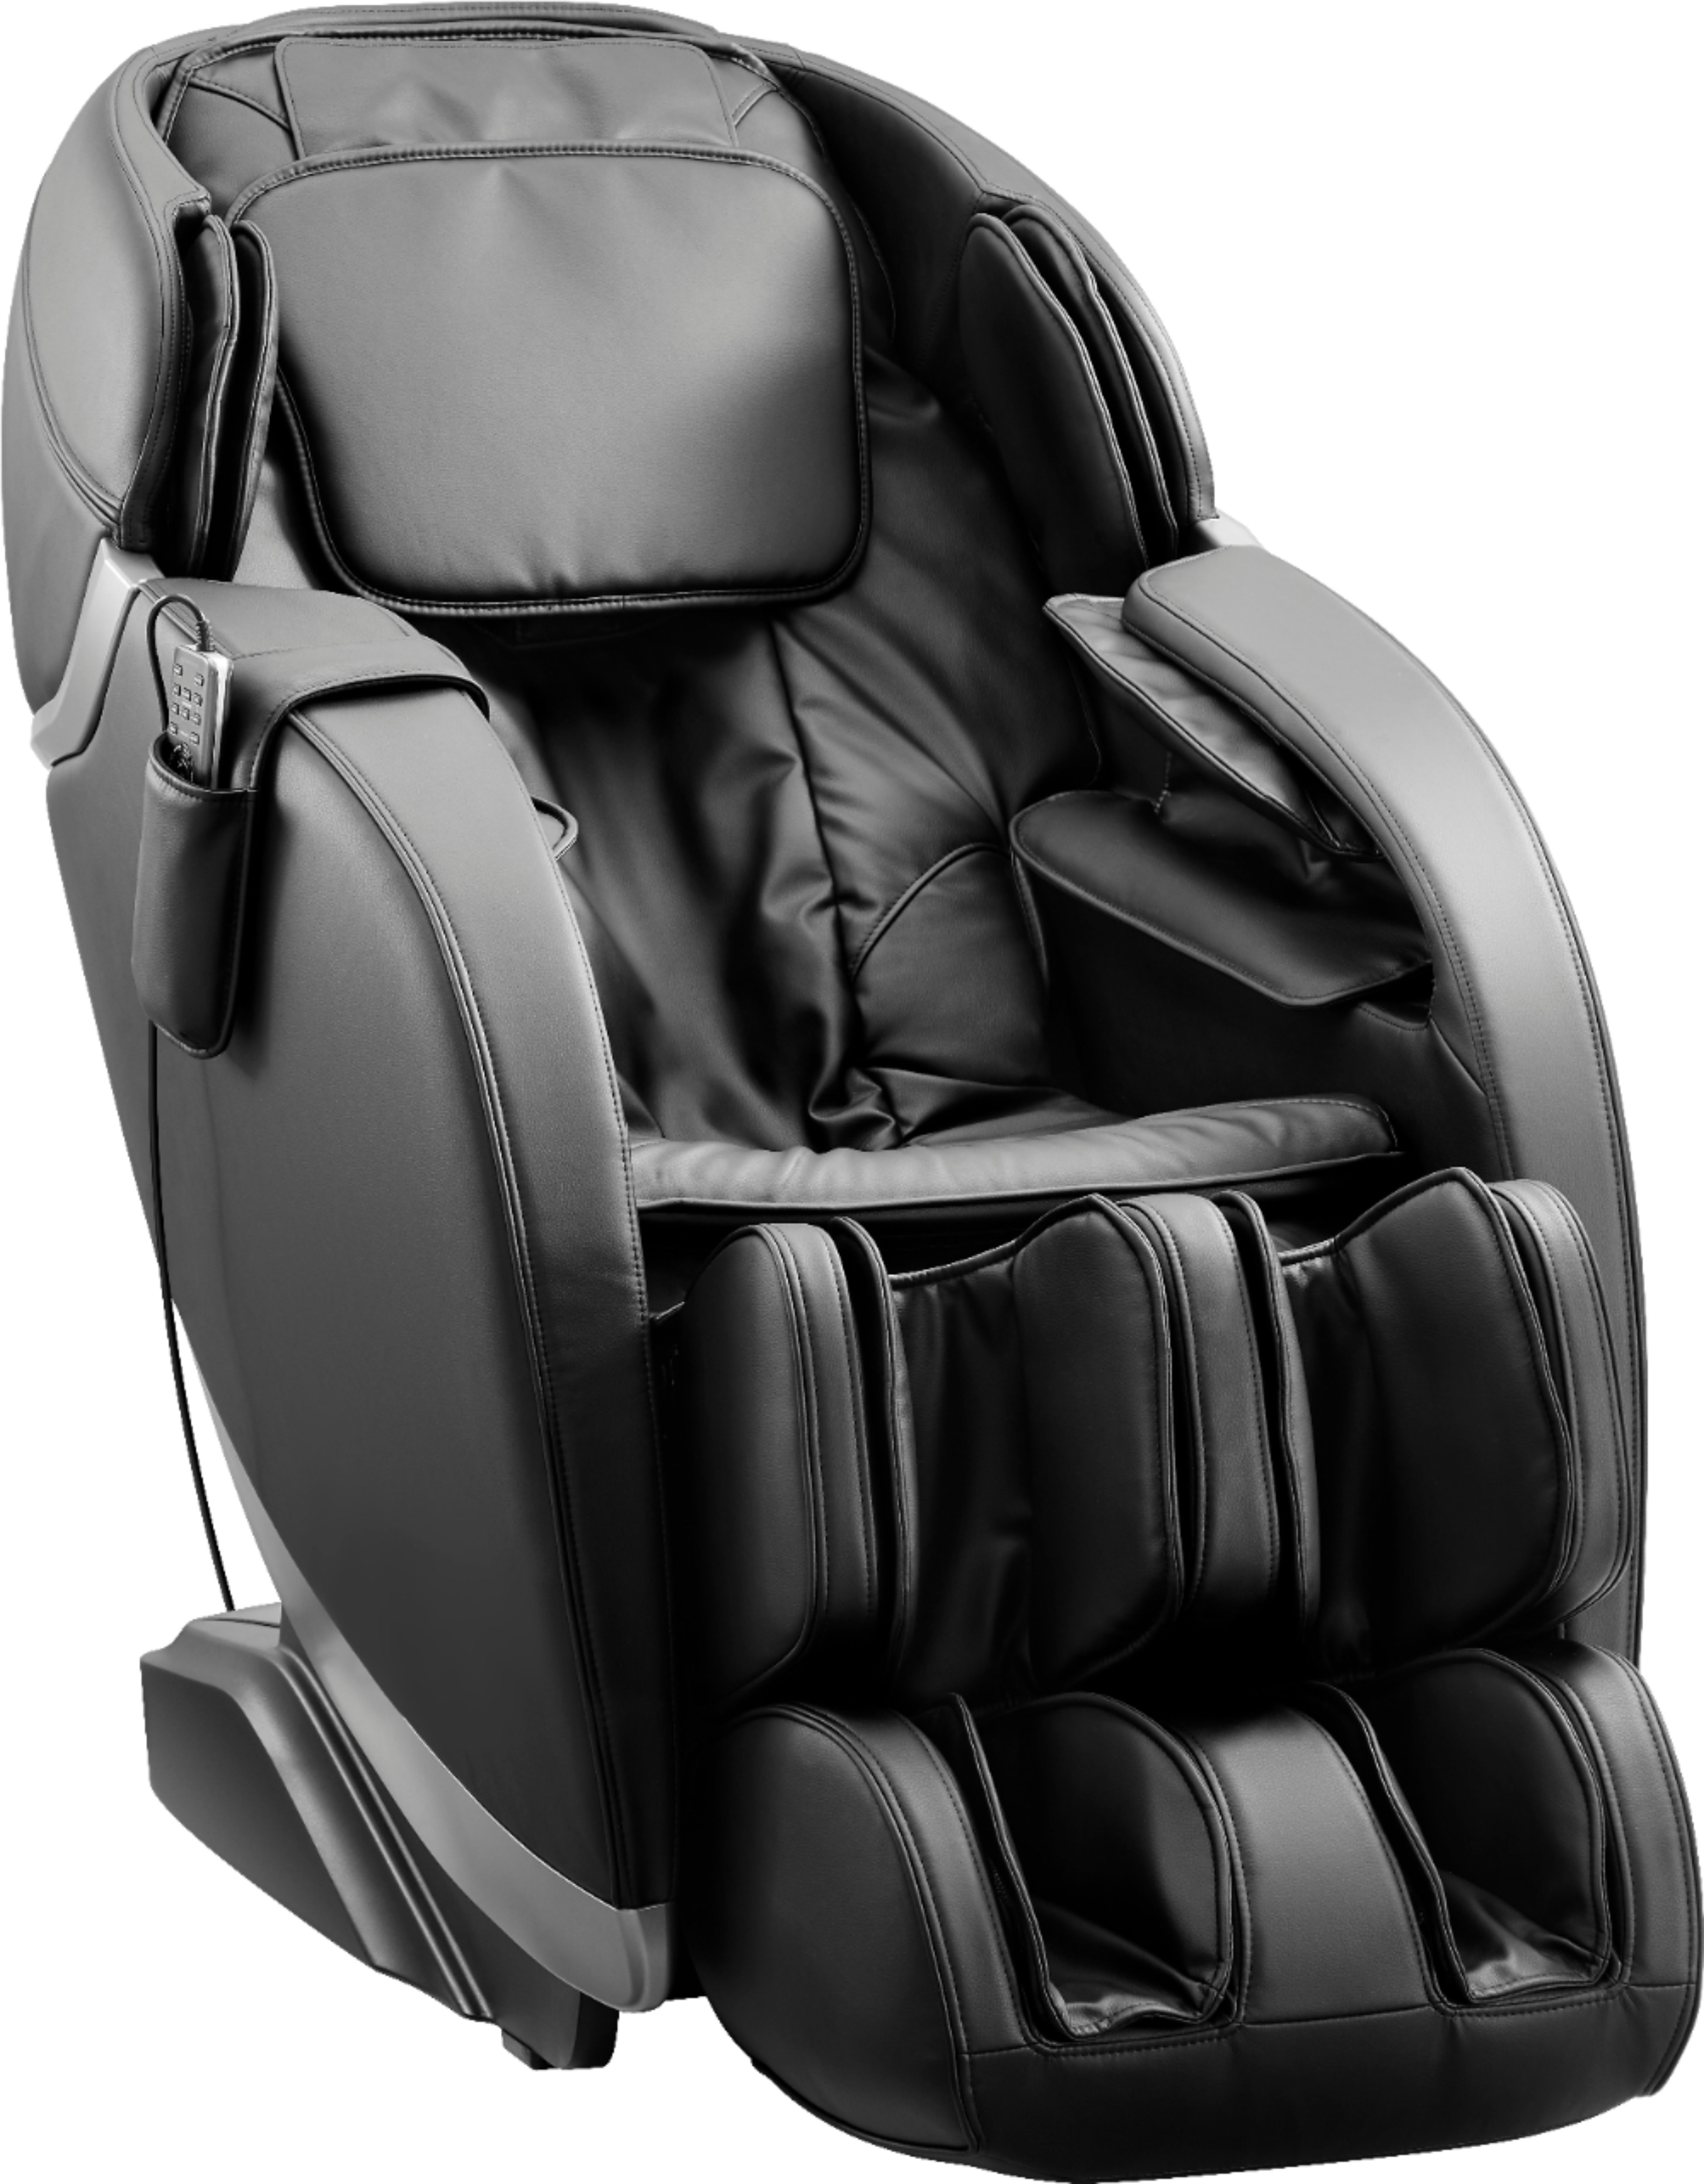 Insignia™ 2D Zero Full Body Massage Chair with silver NS-MGC300BK1 - Best